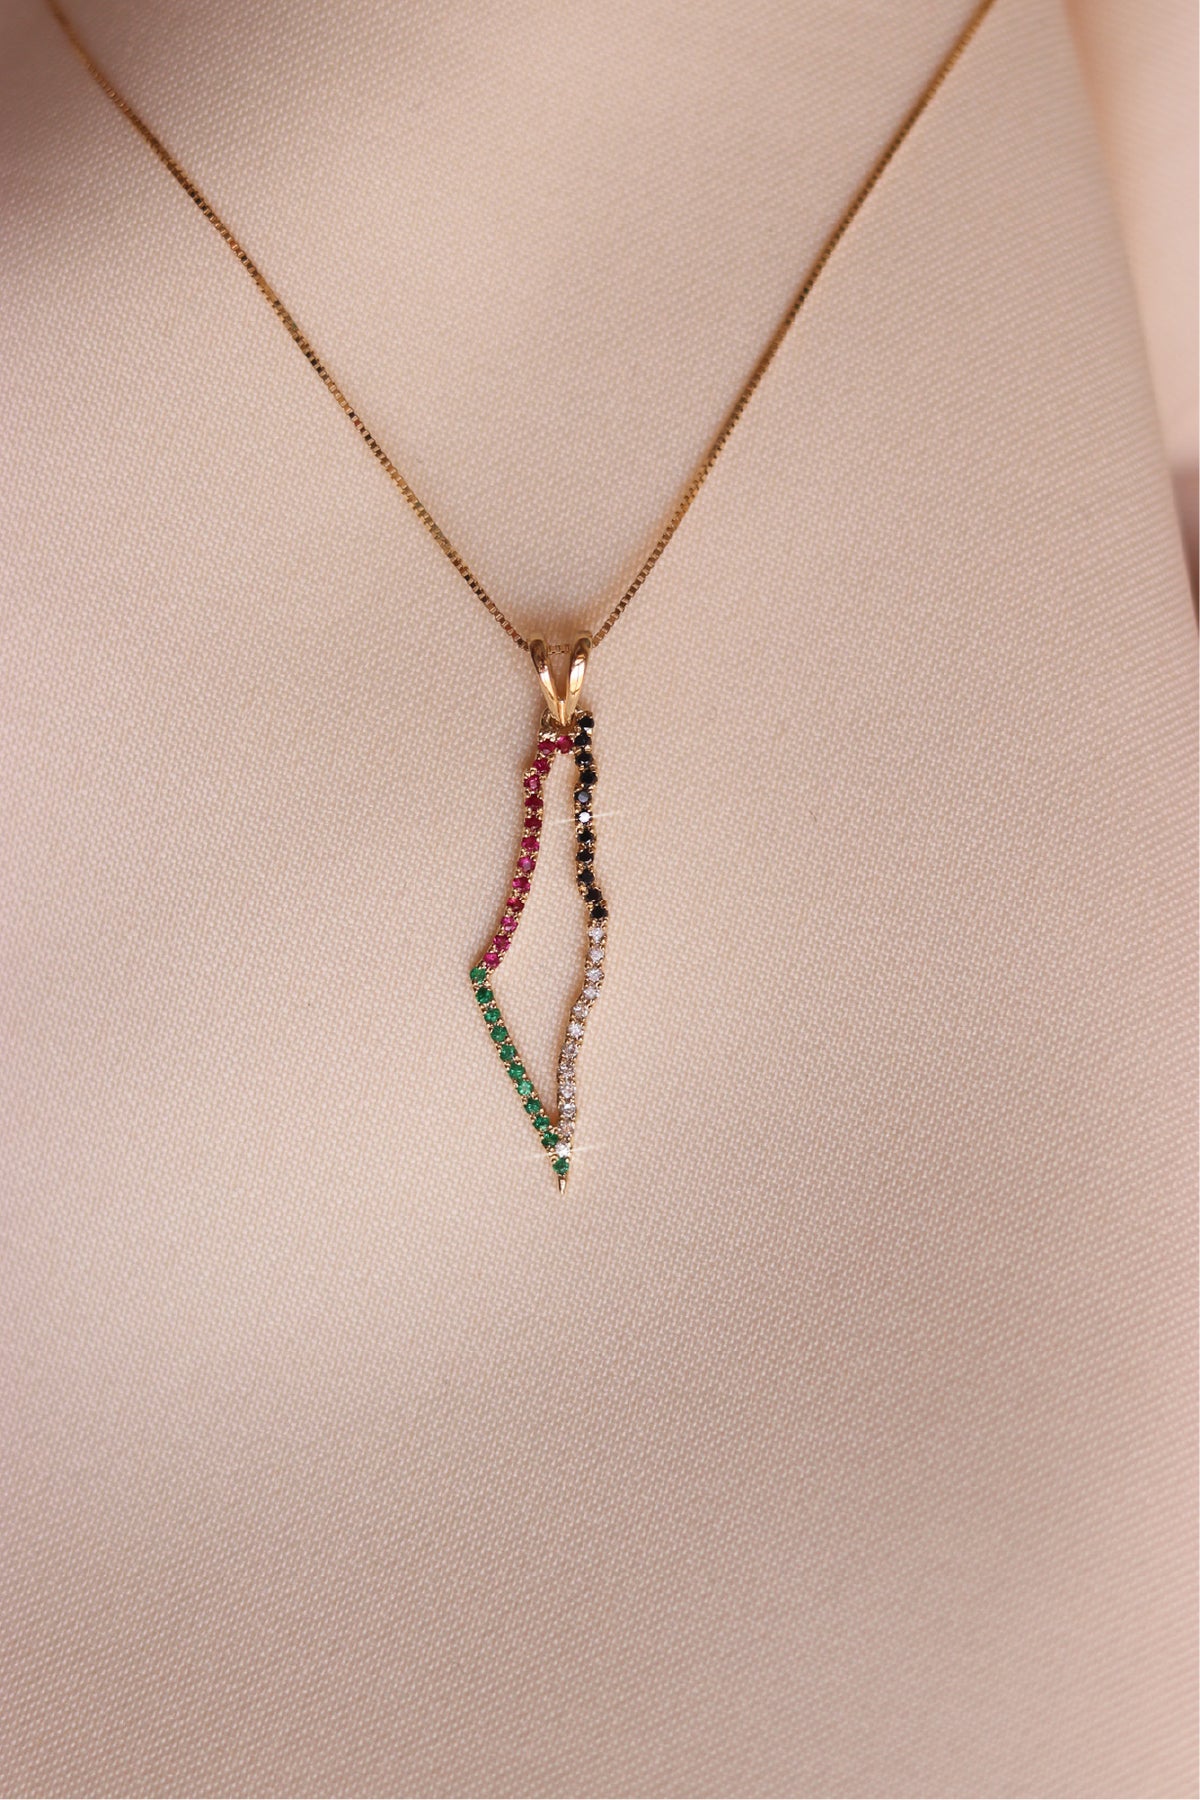 Palestine flag themed gold map frame with diamonds necklace